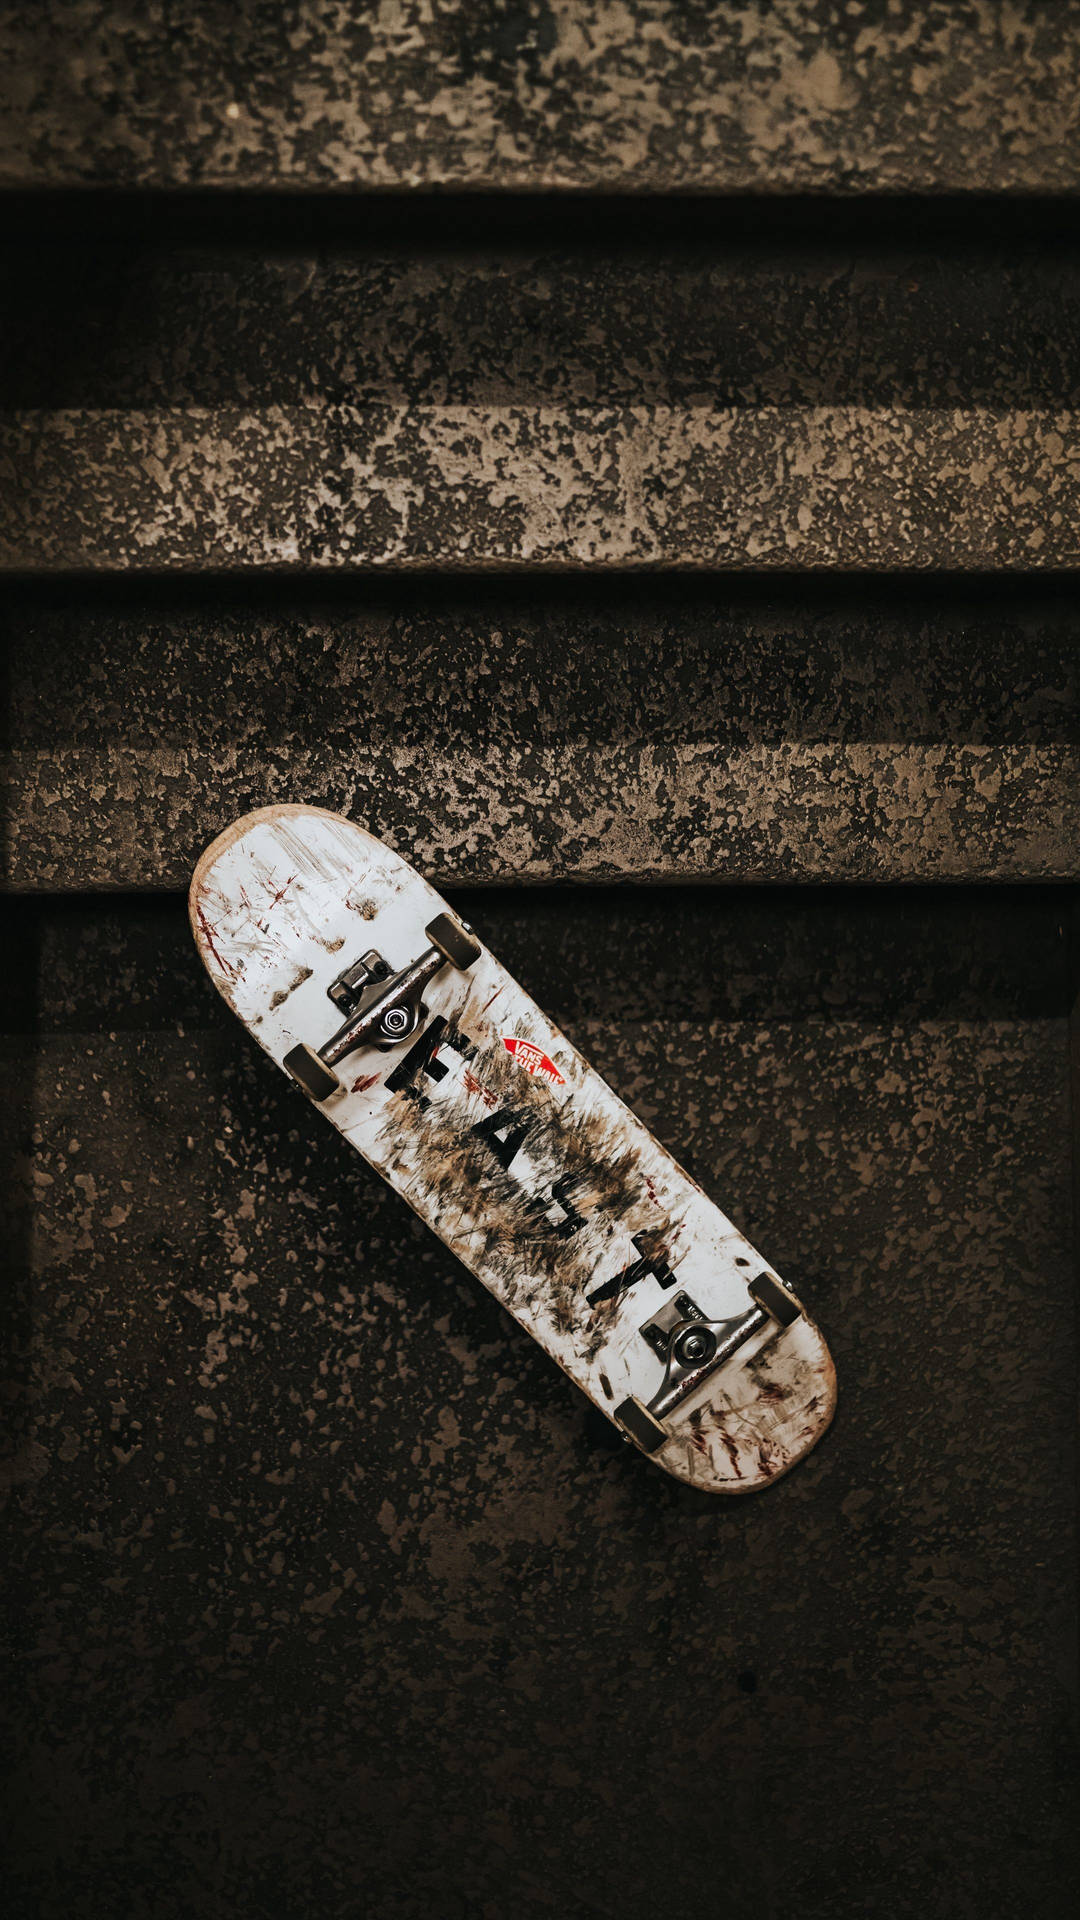 Concrete Stairs And Skateboard Iphone Background